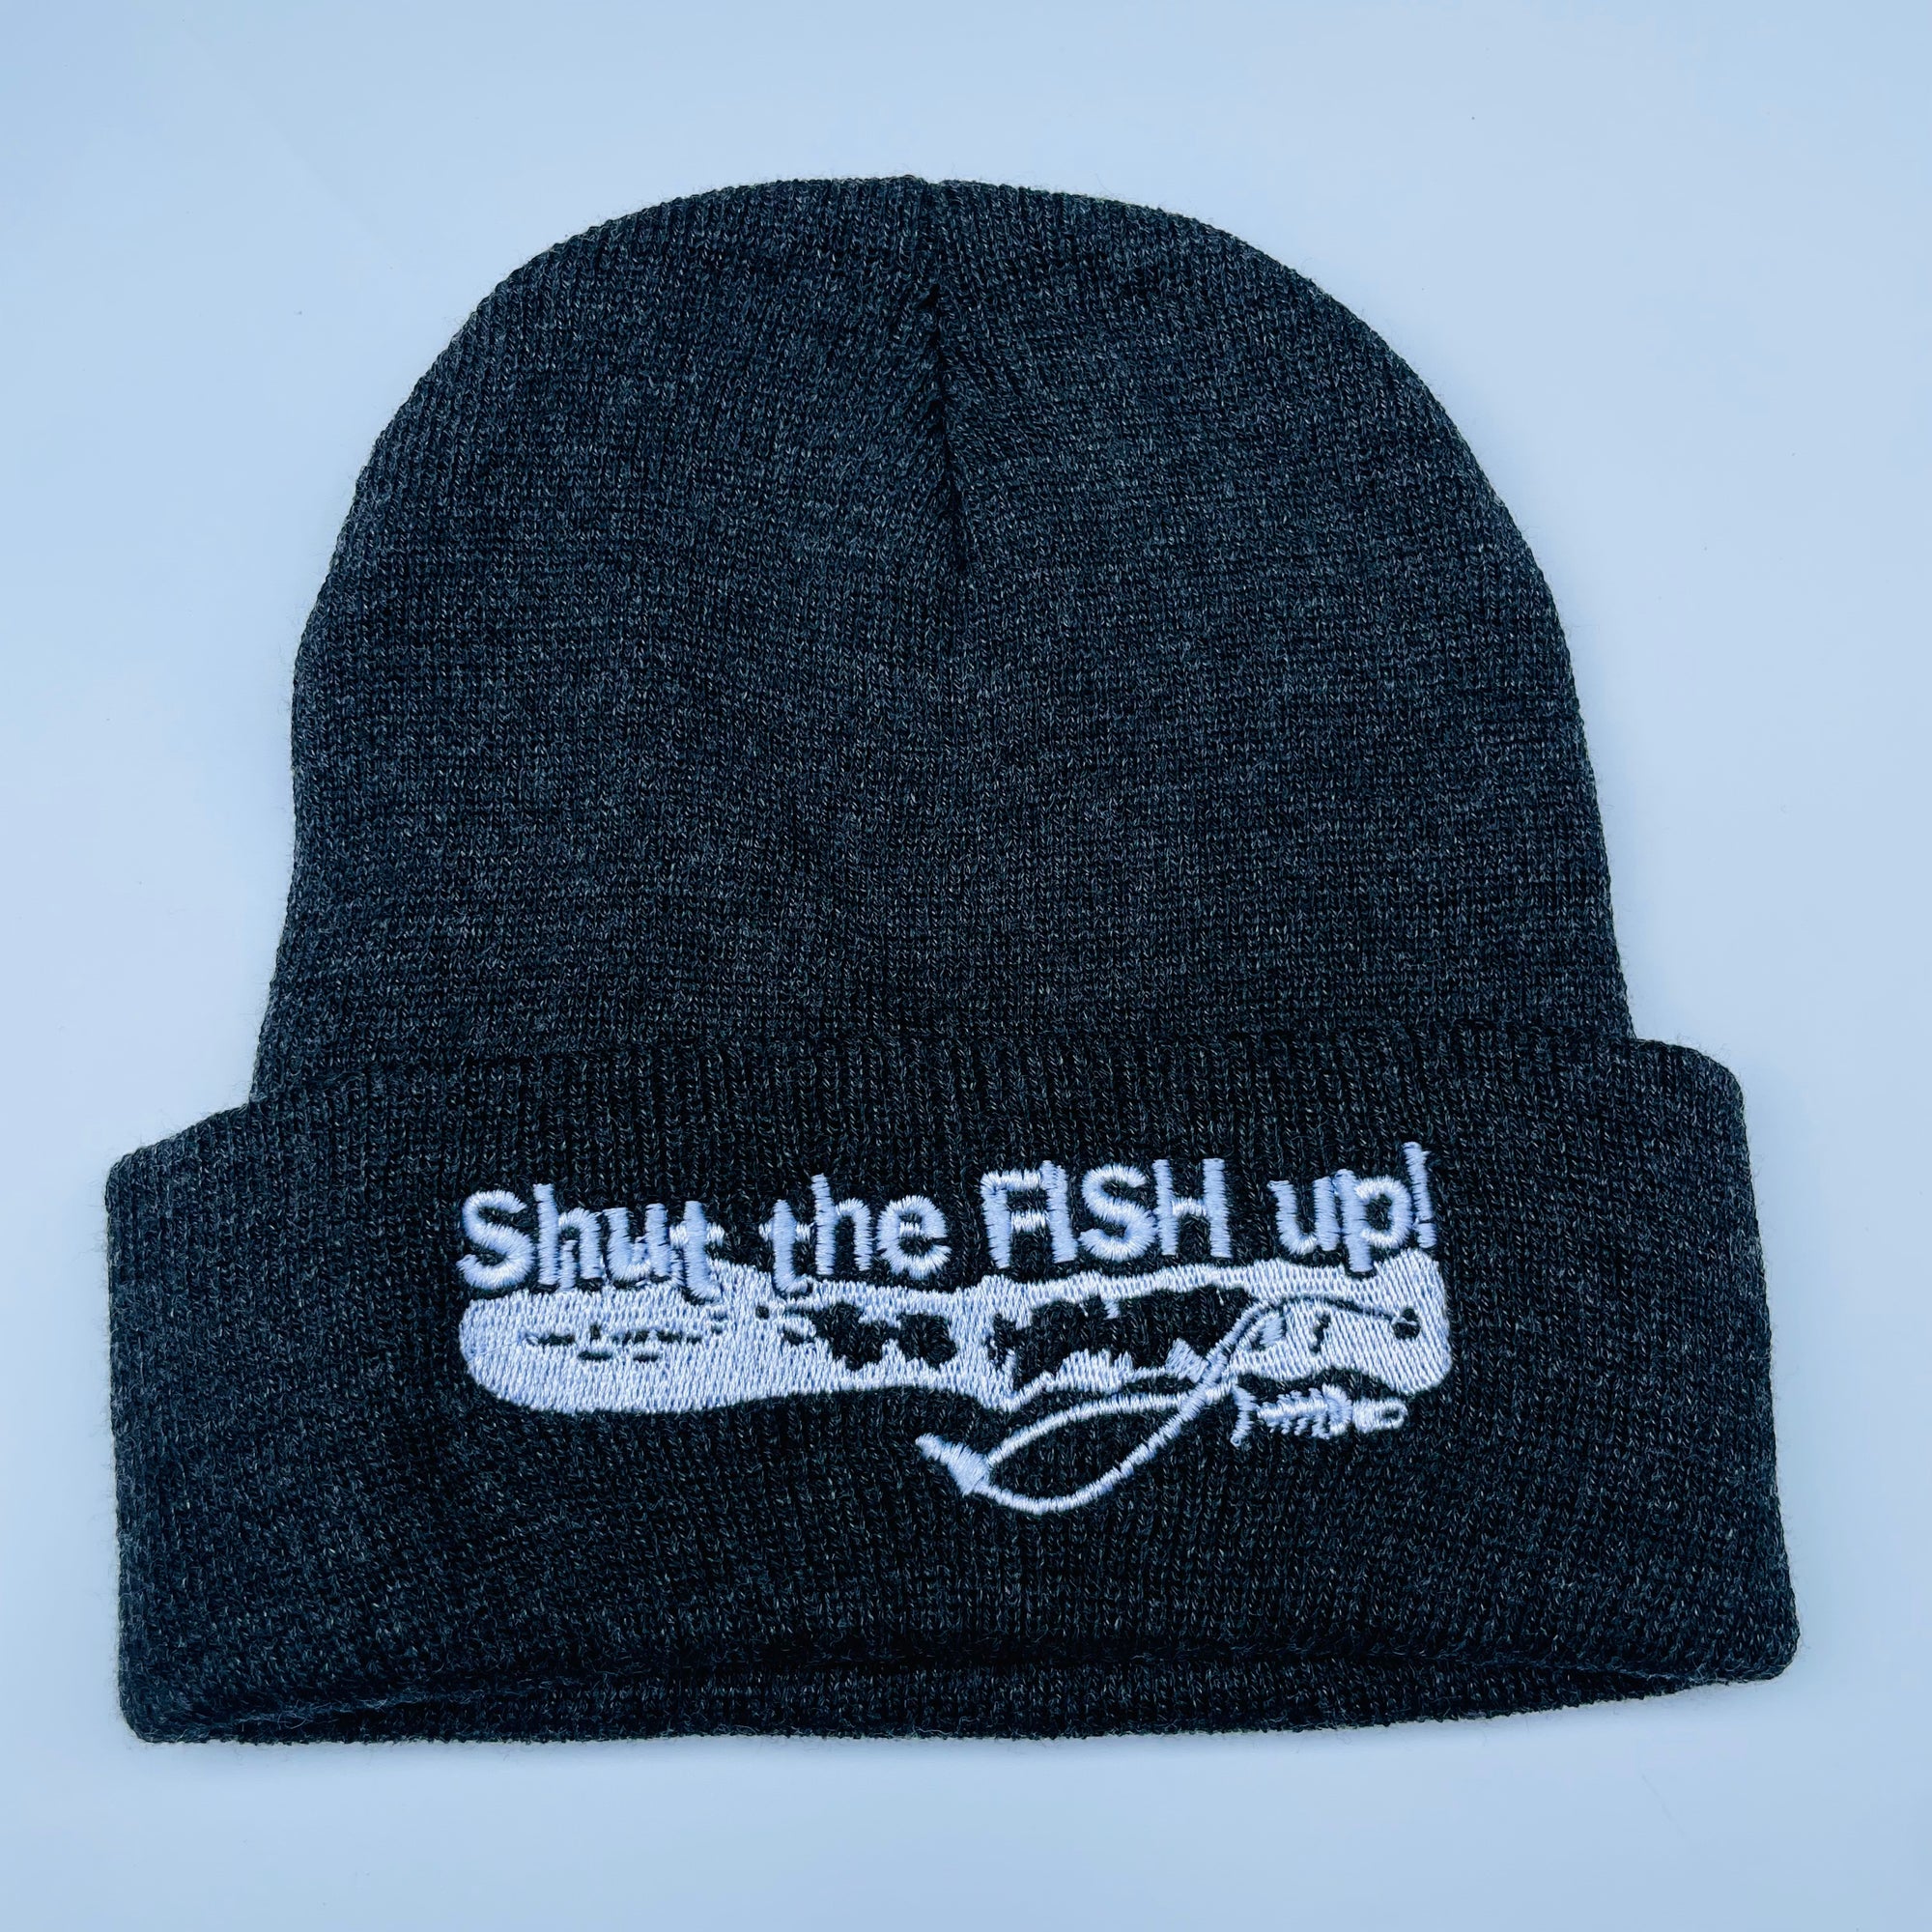 Shut The Fish Up Toque - BLACK - STFUBLK - House of Himwitsa Native Art Gallery and Gifts